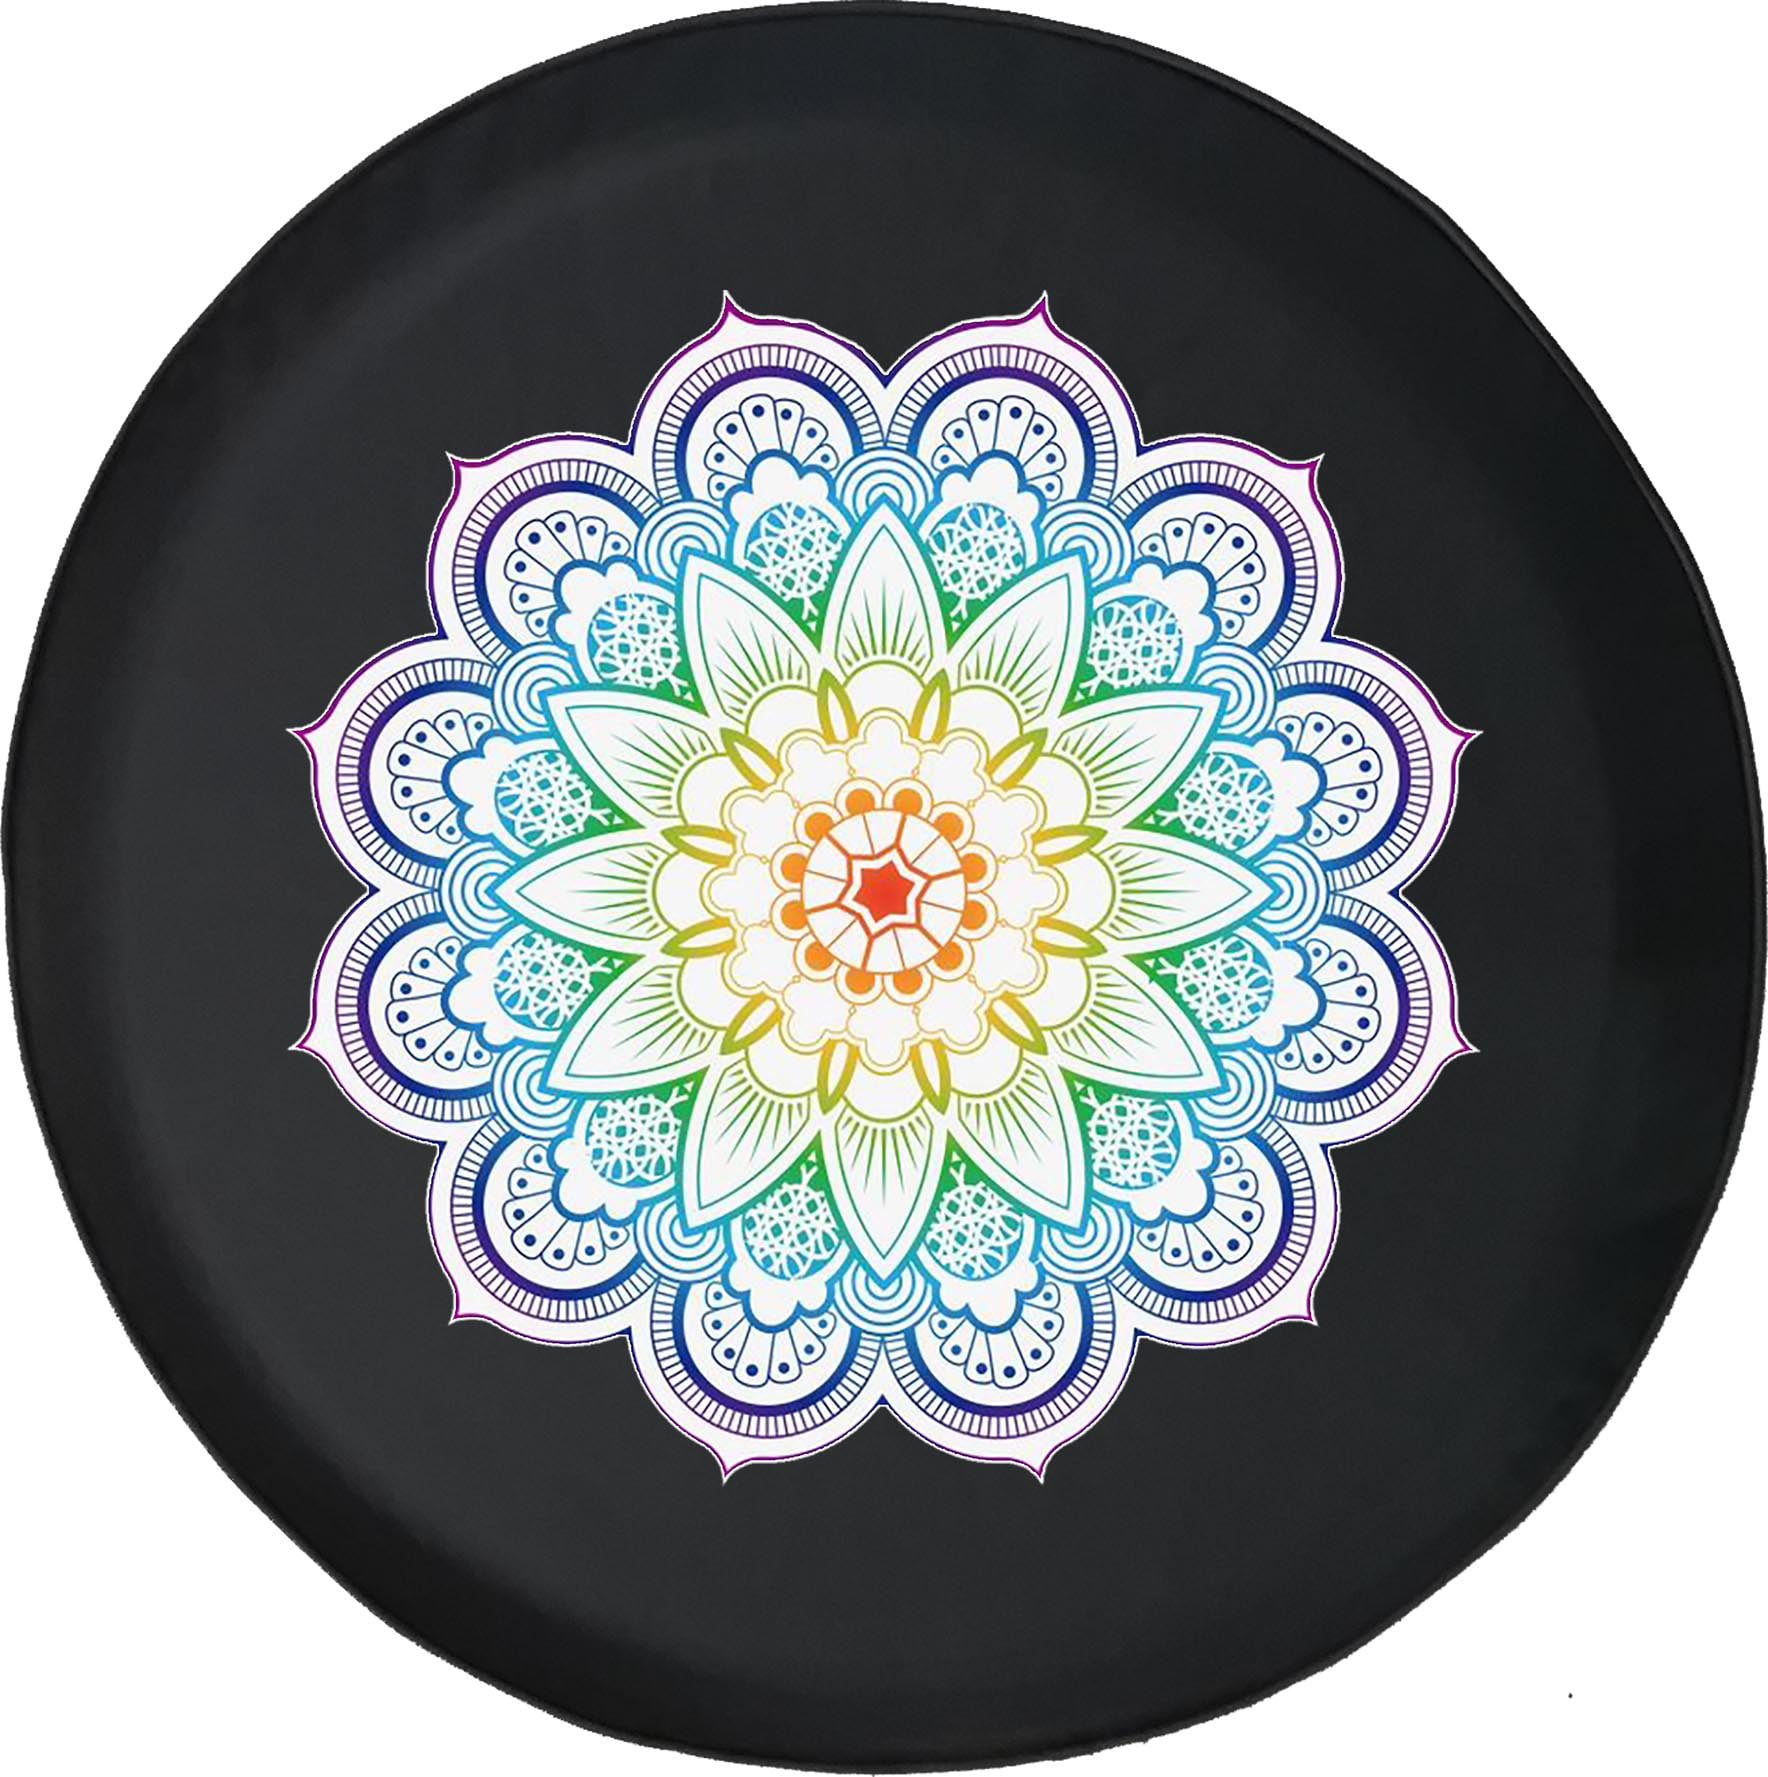 Black Tire Covers Tire Accessories for Campers, SUVs, Trailers, Trucks,  RVs and More Mandala Flower Black 29 Inch